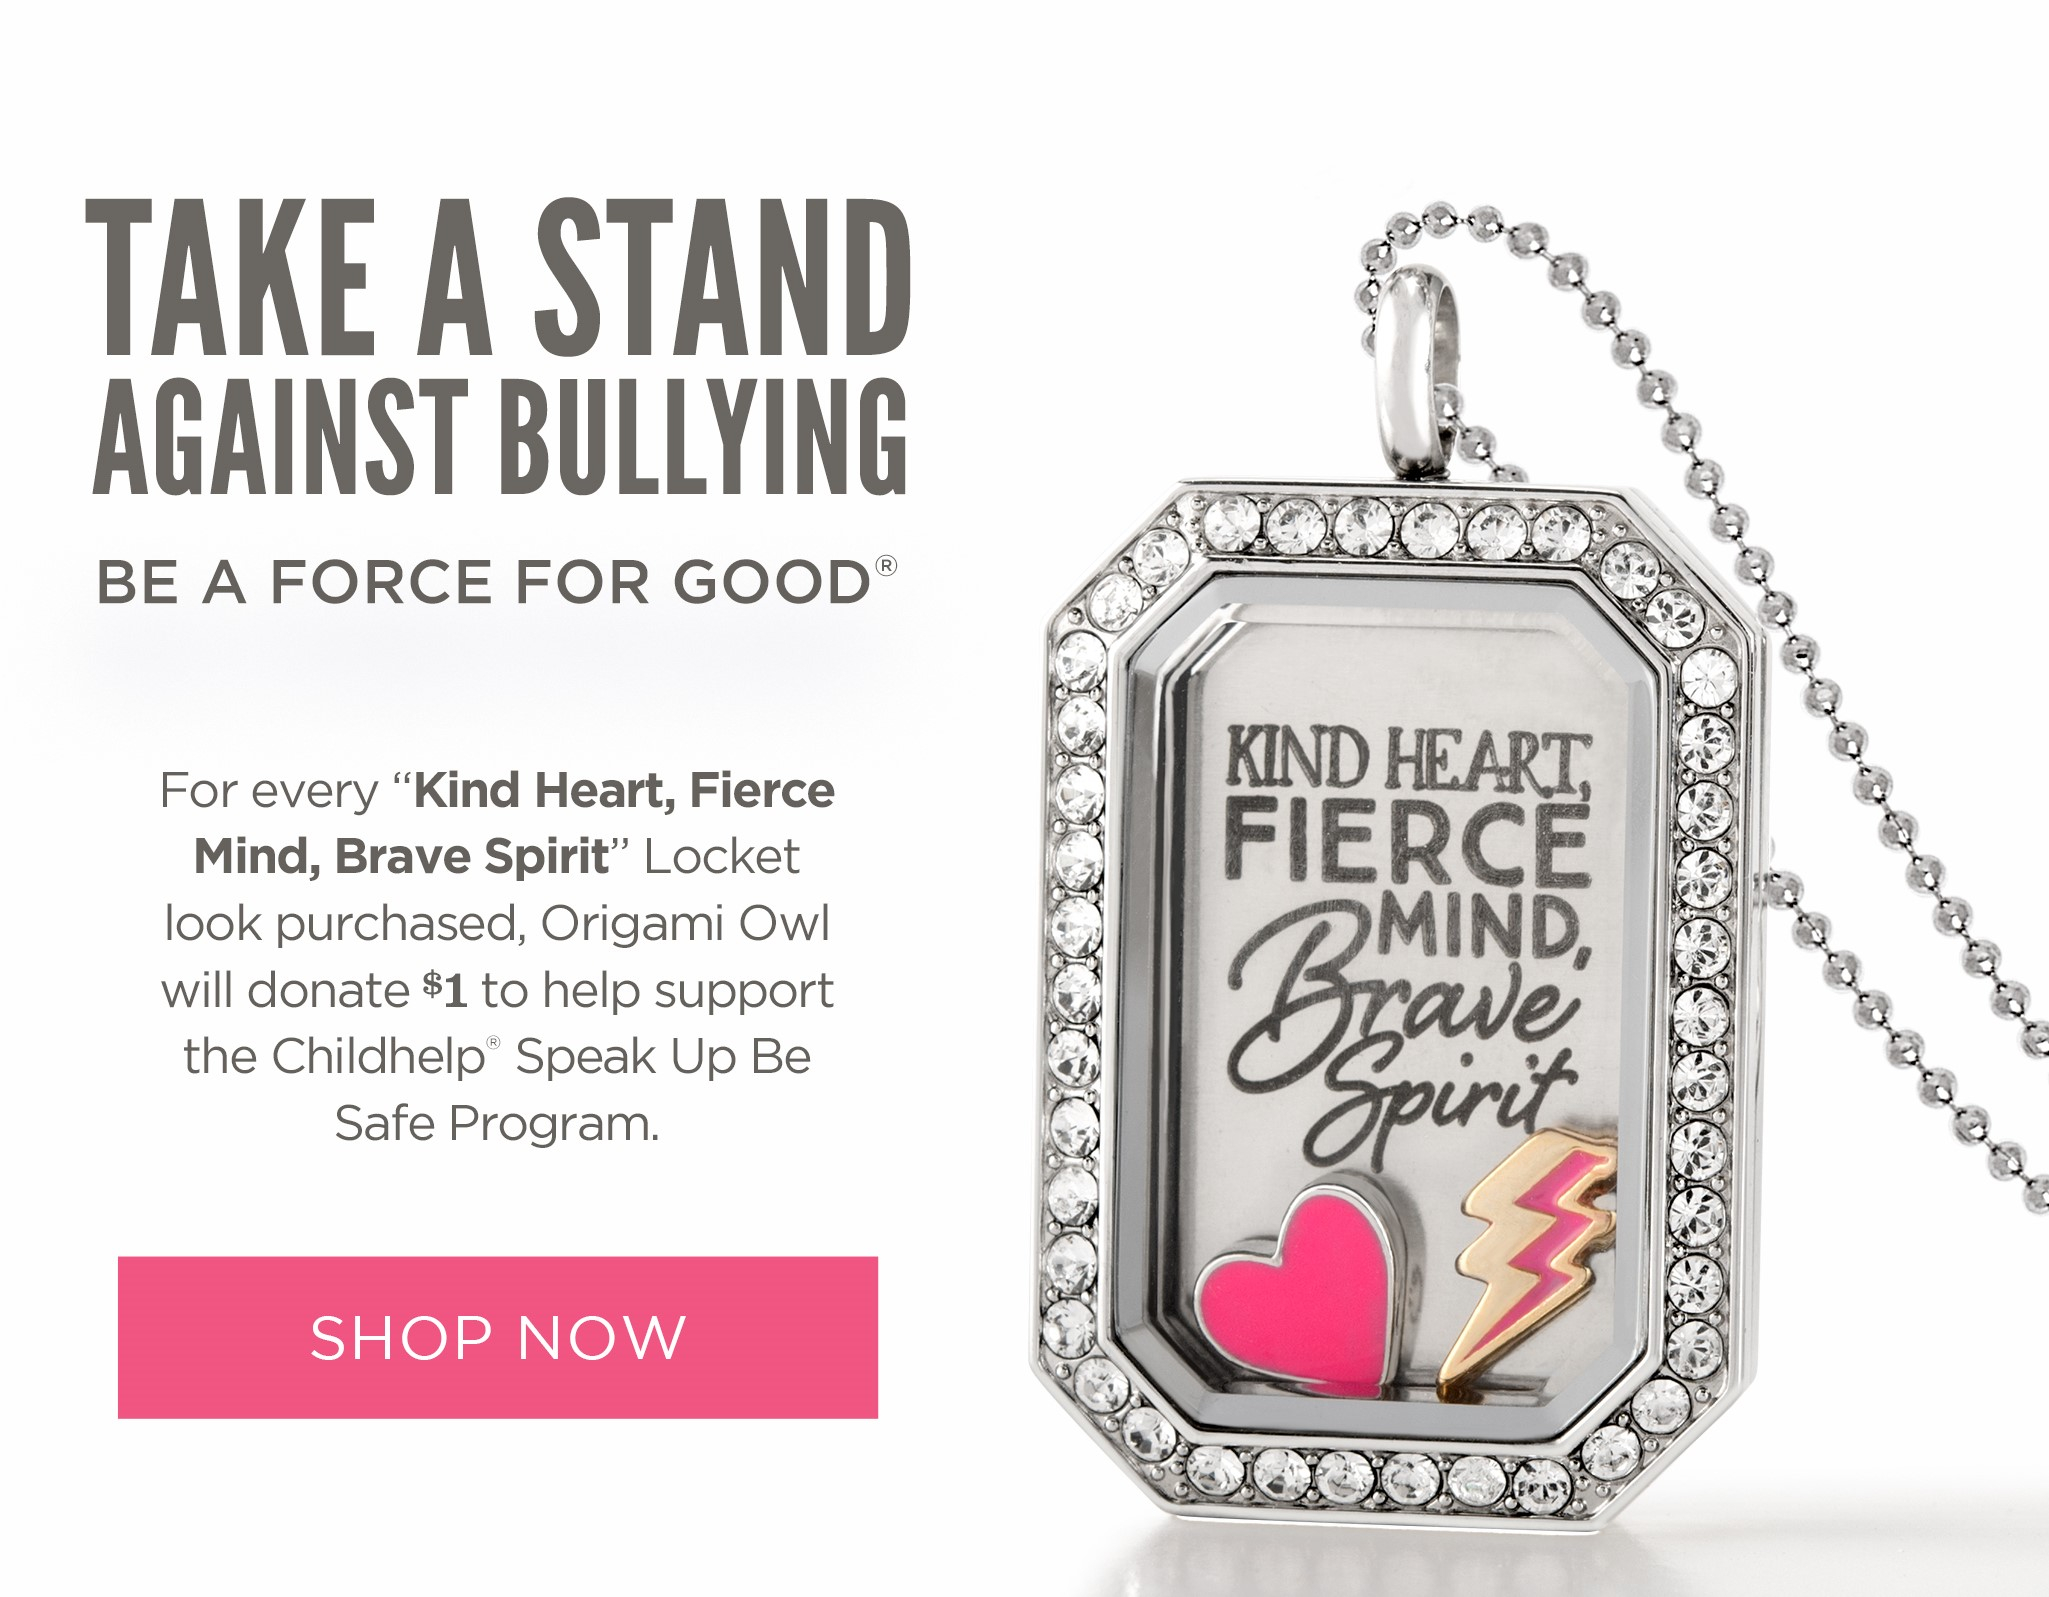 Origami Owl Over The Heart Chain Take A Stand Against Bullying With October Force For Good Look